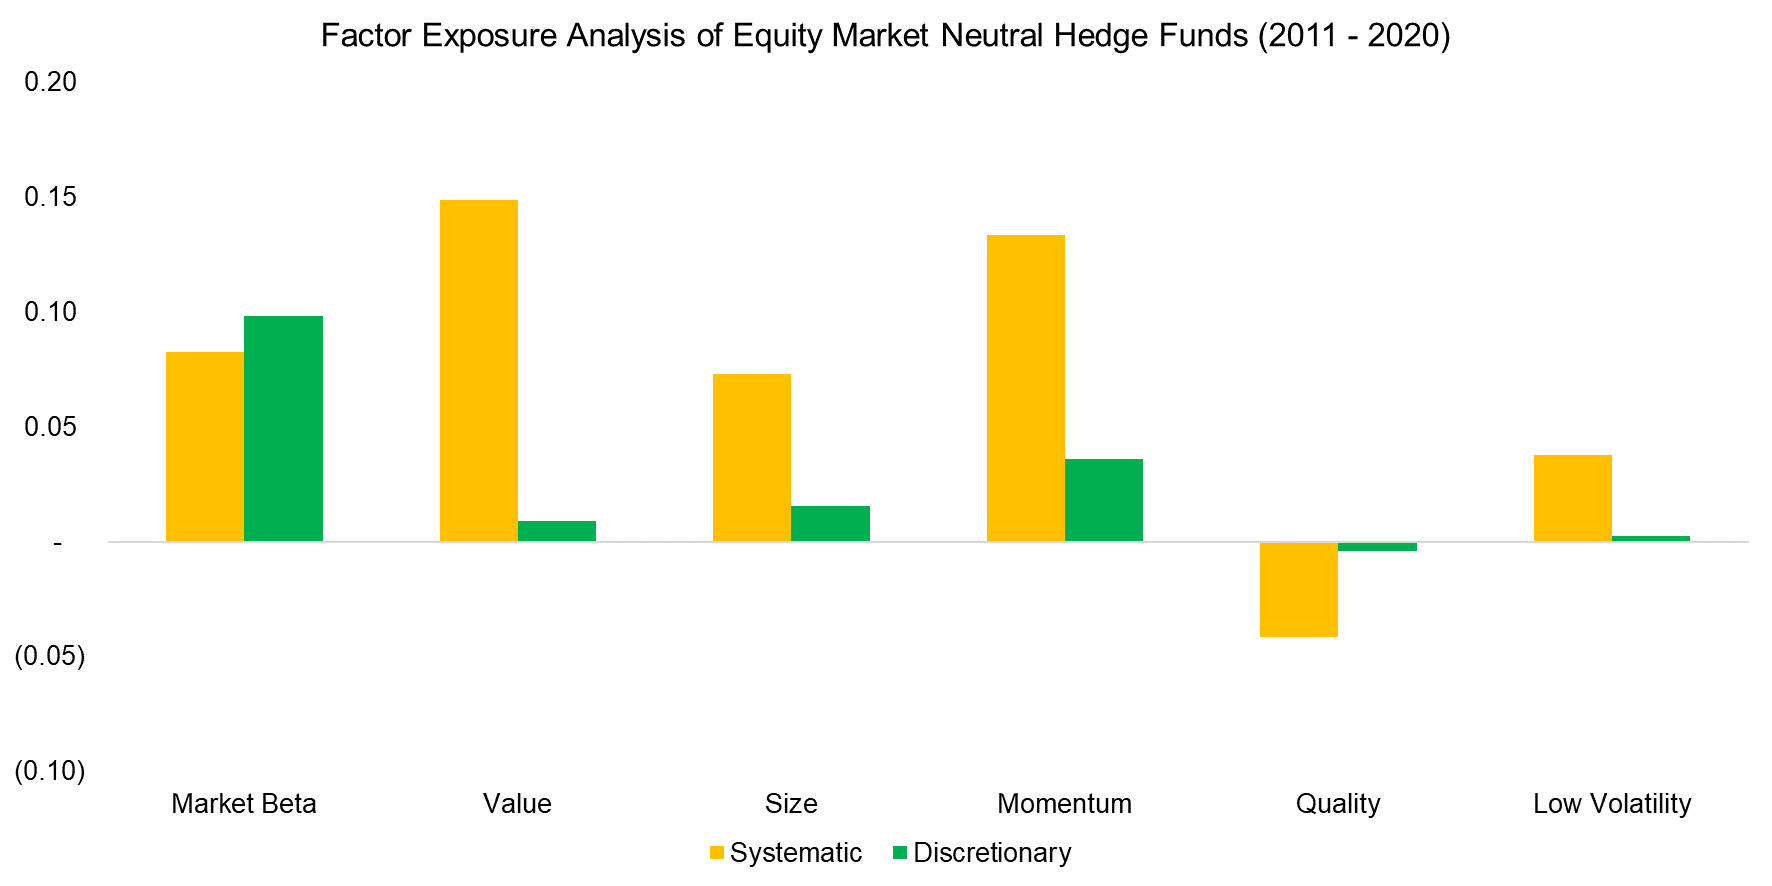 Factor Exposure Analysis of Equity Market Neutral Hedge Funds (2011 - 2020)